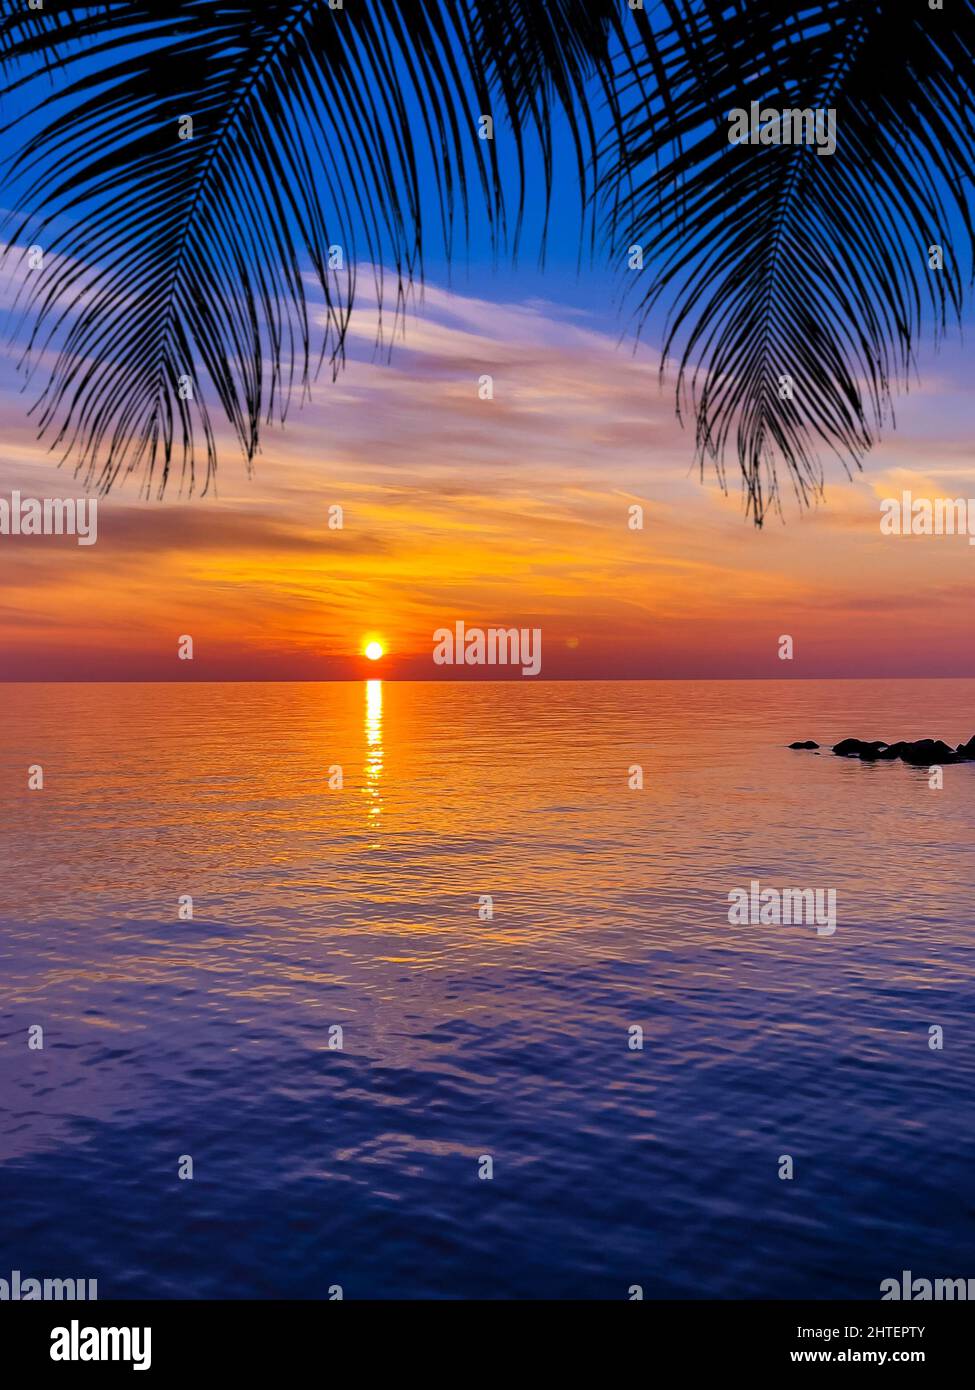 Nice sunset. Dark palm trees silhouettes on colorful tropical ocean sunset background Stock Photo